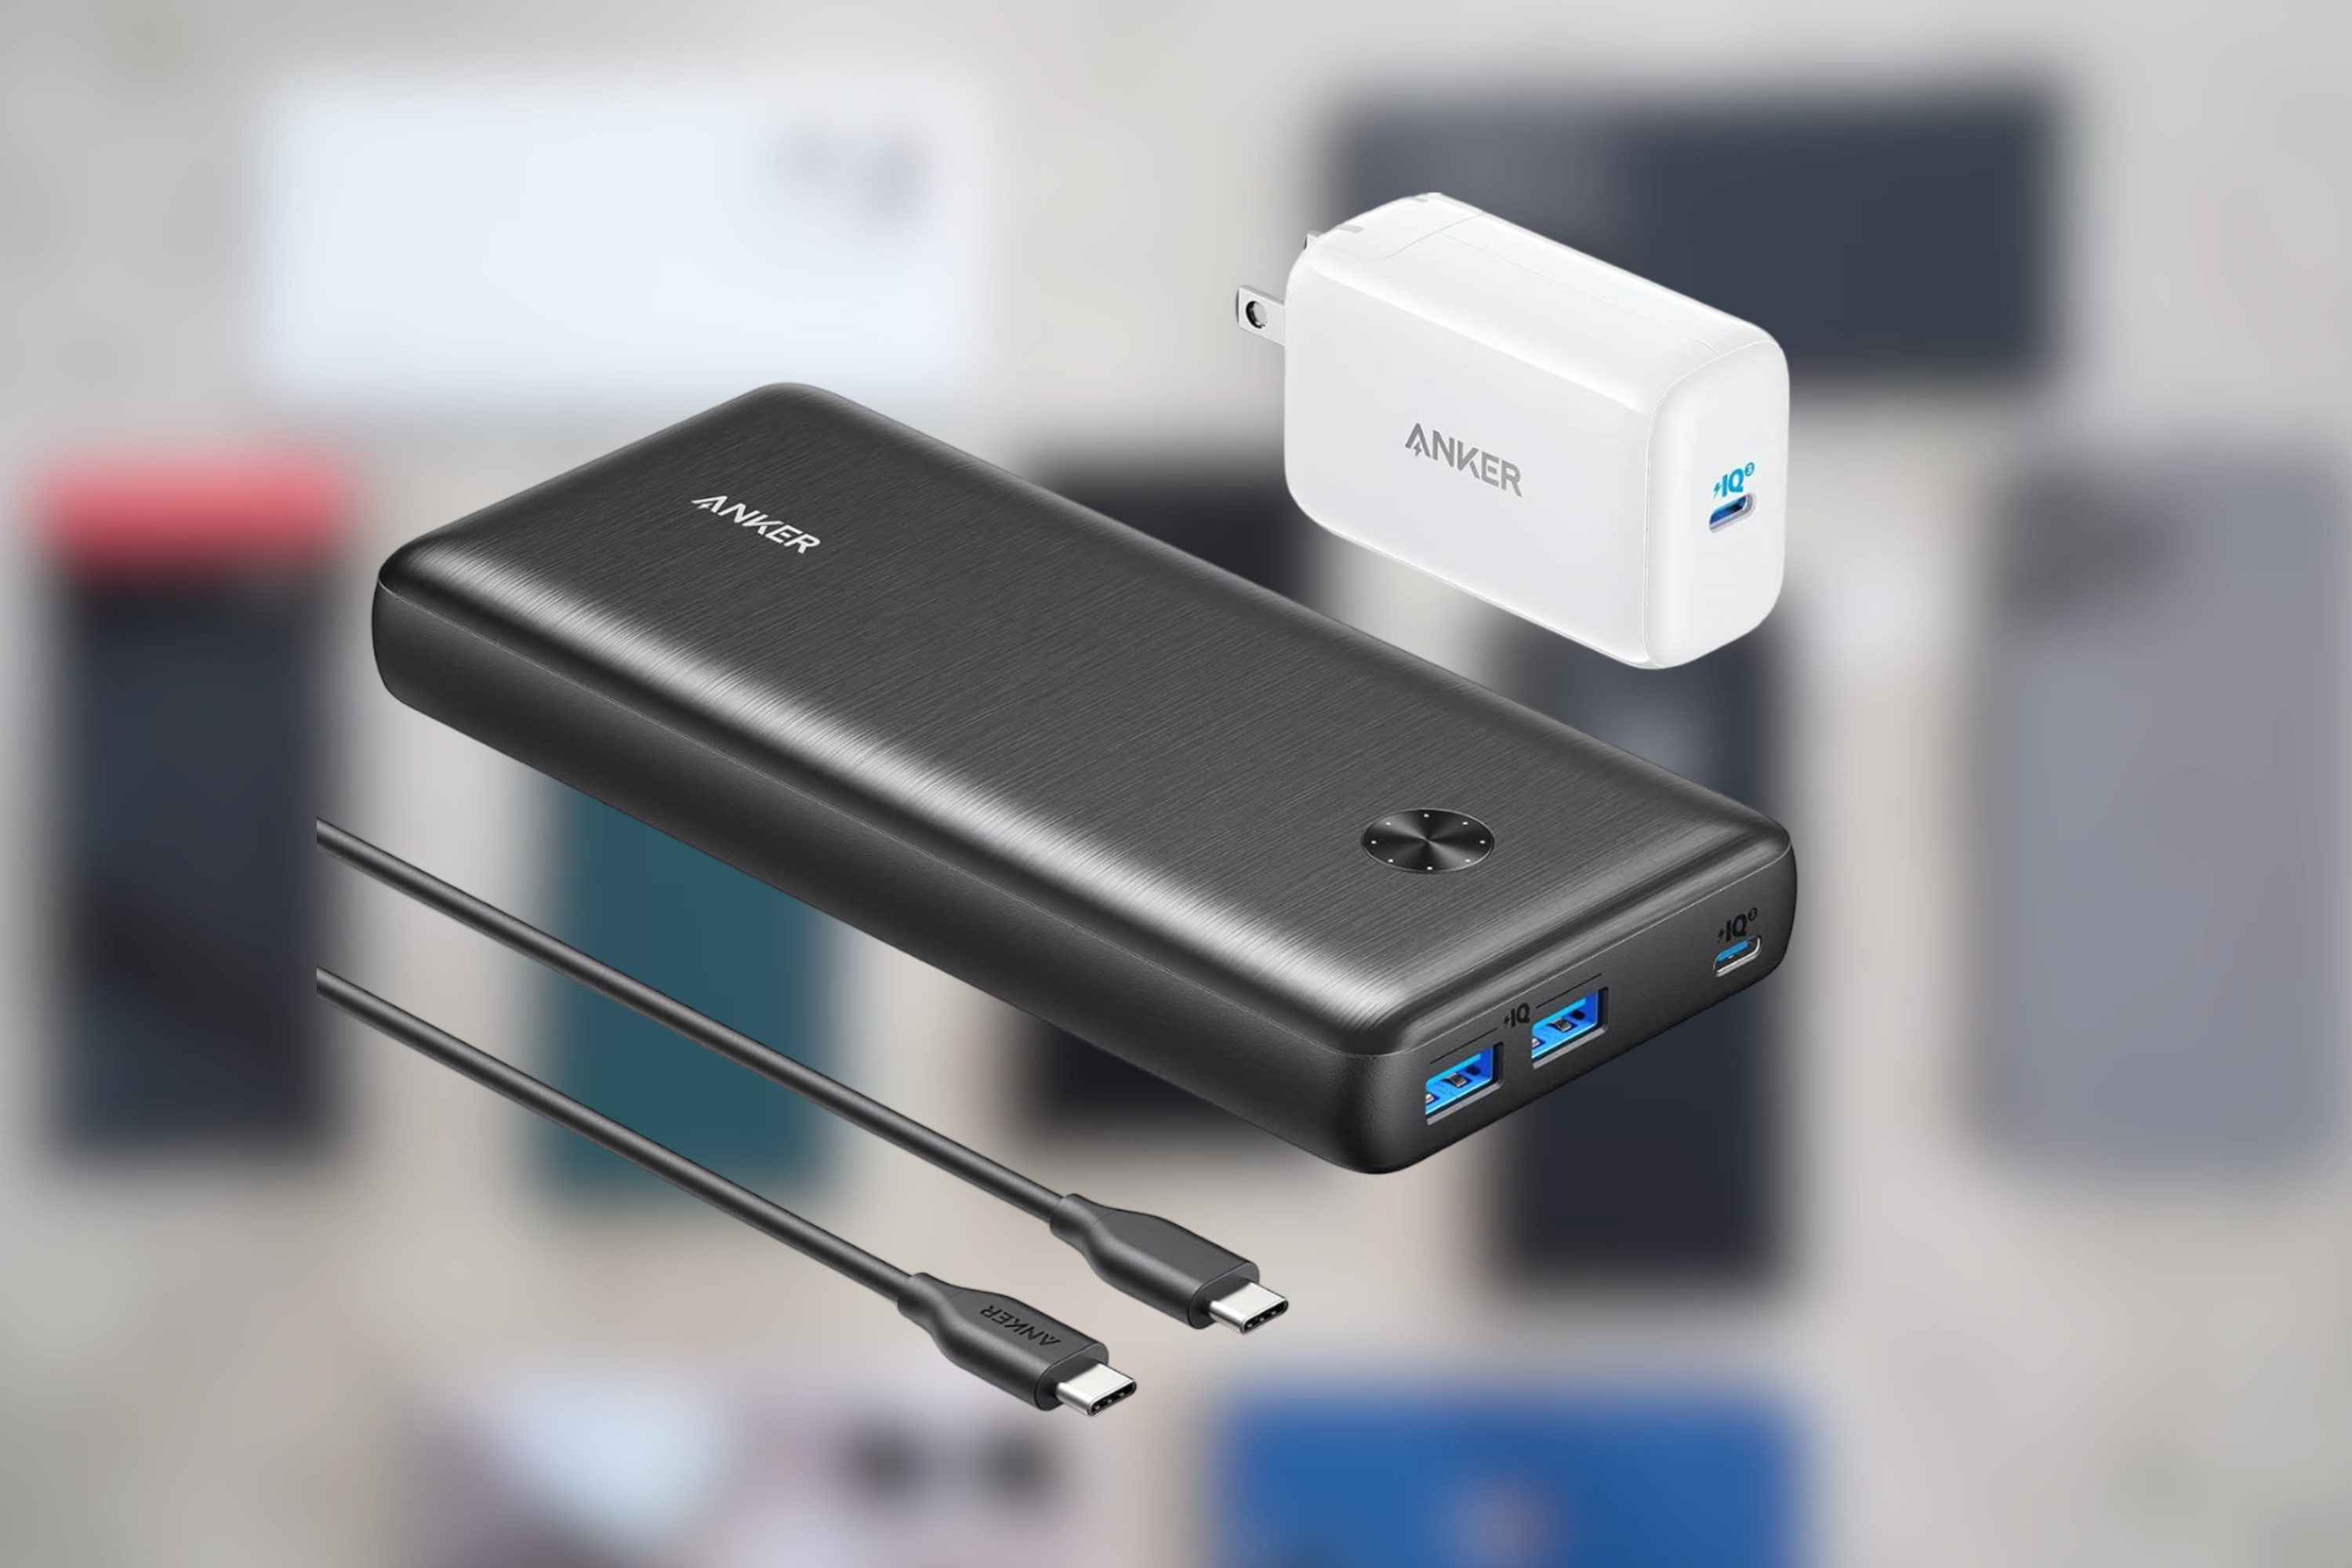 Anker's elite charging bundle gets steep 54% discount in limited-time deal